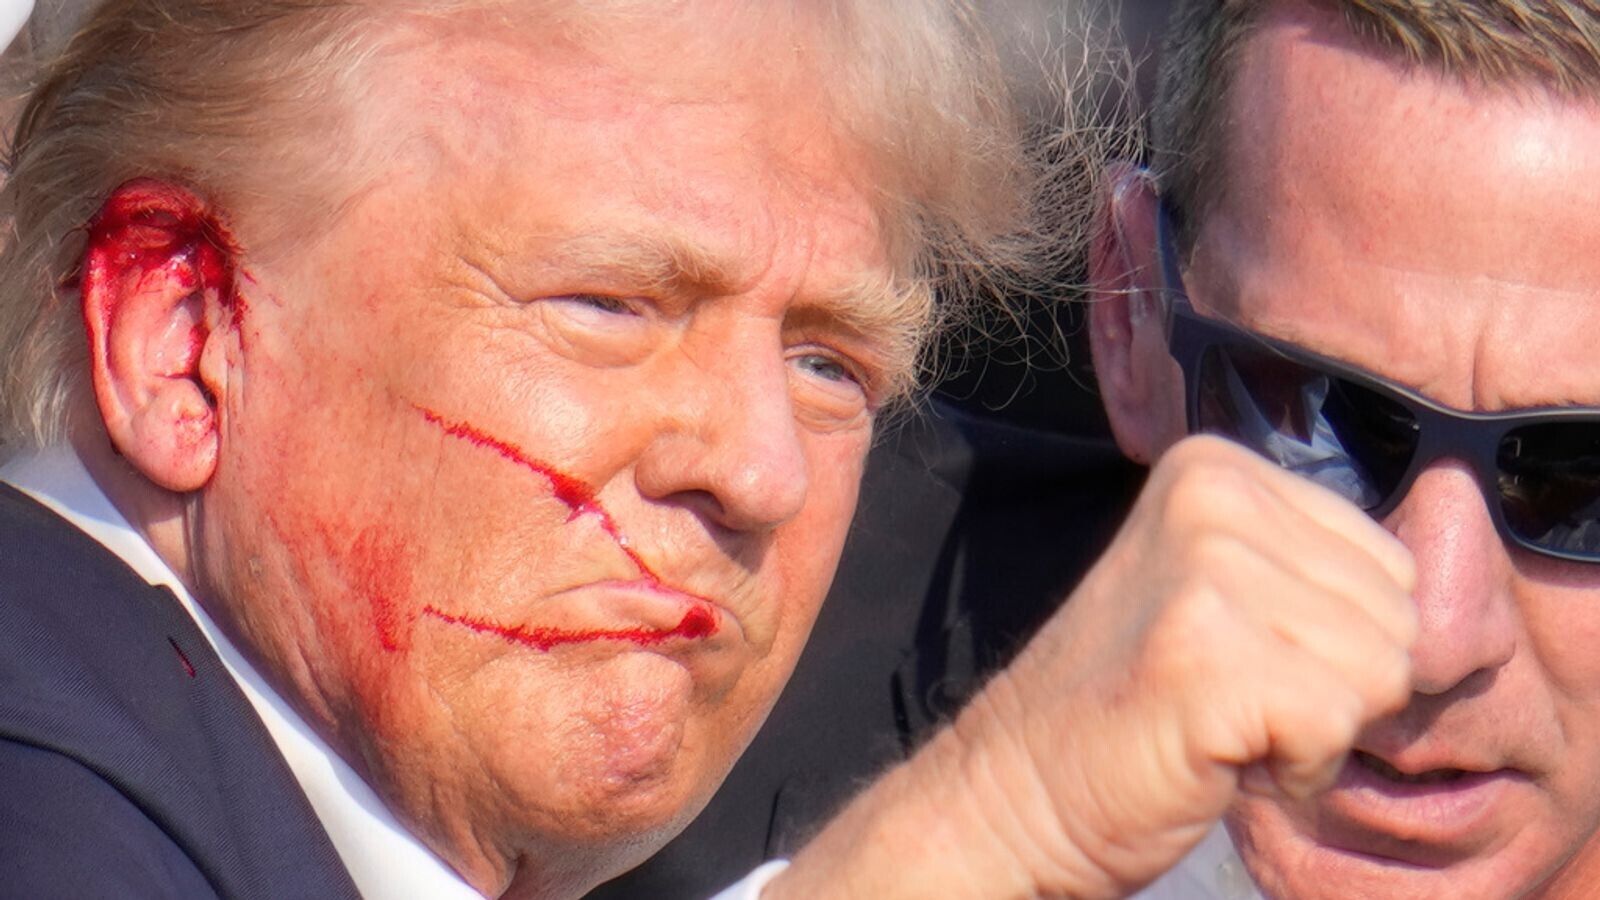 Photo of the Assassination attempt of Donald Trump 4x6TRUMP 2024